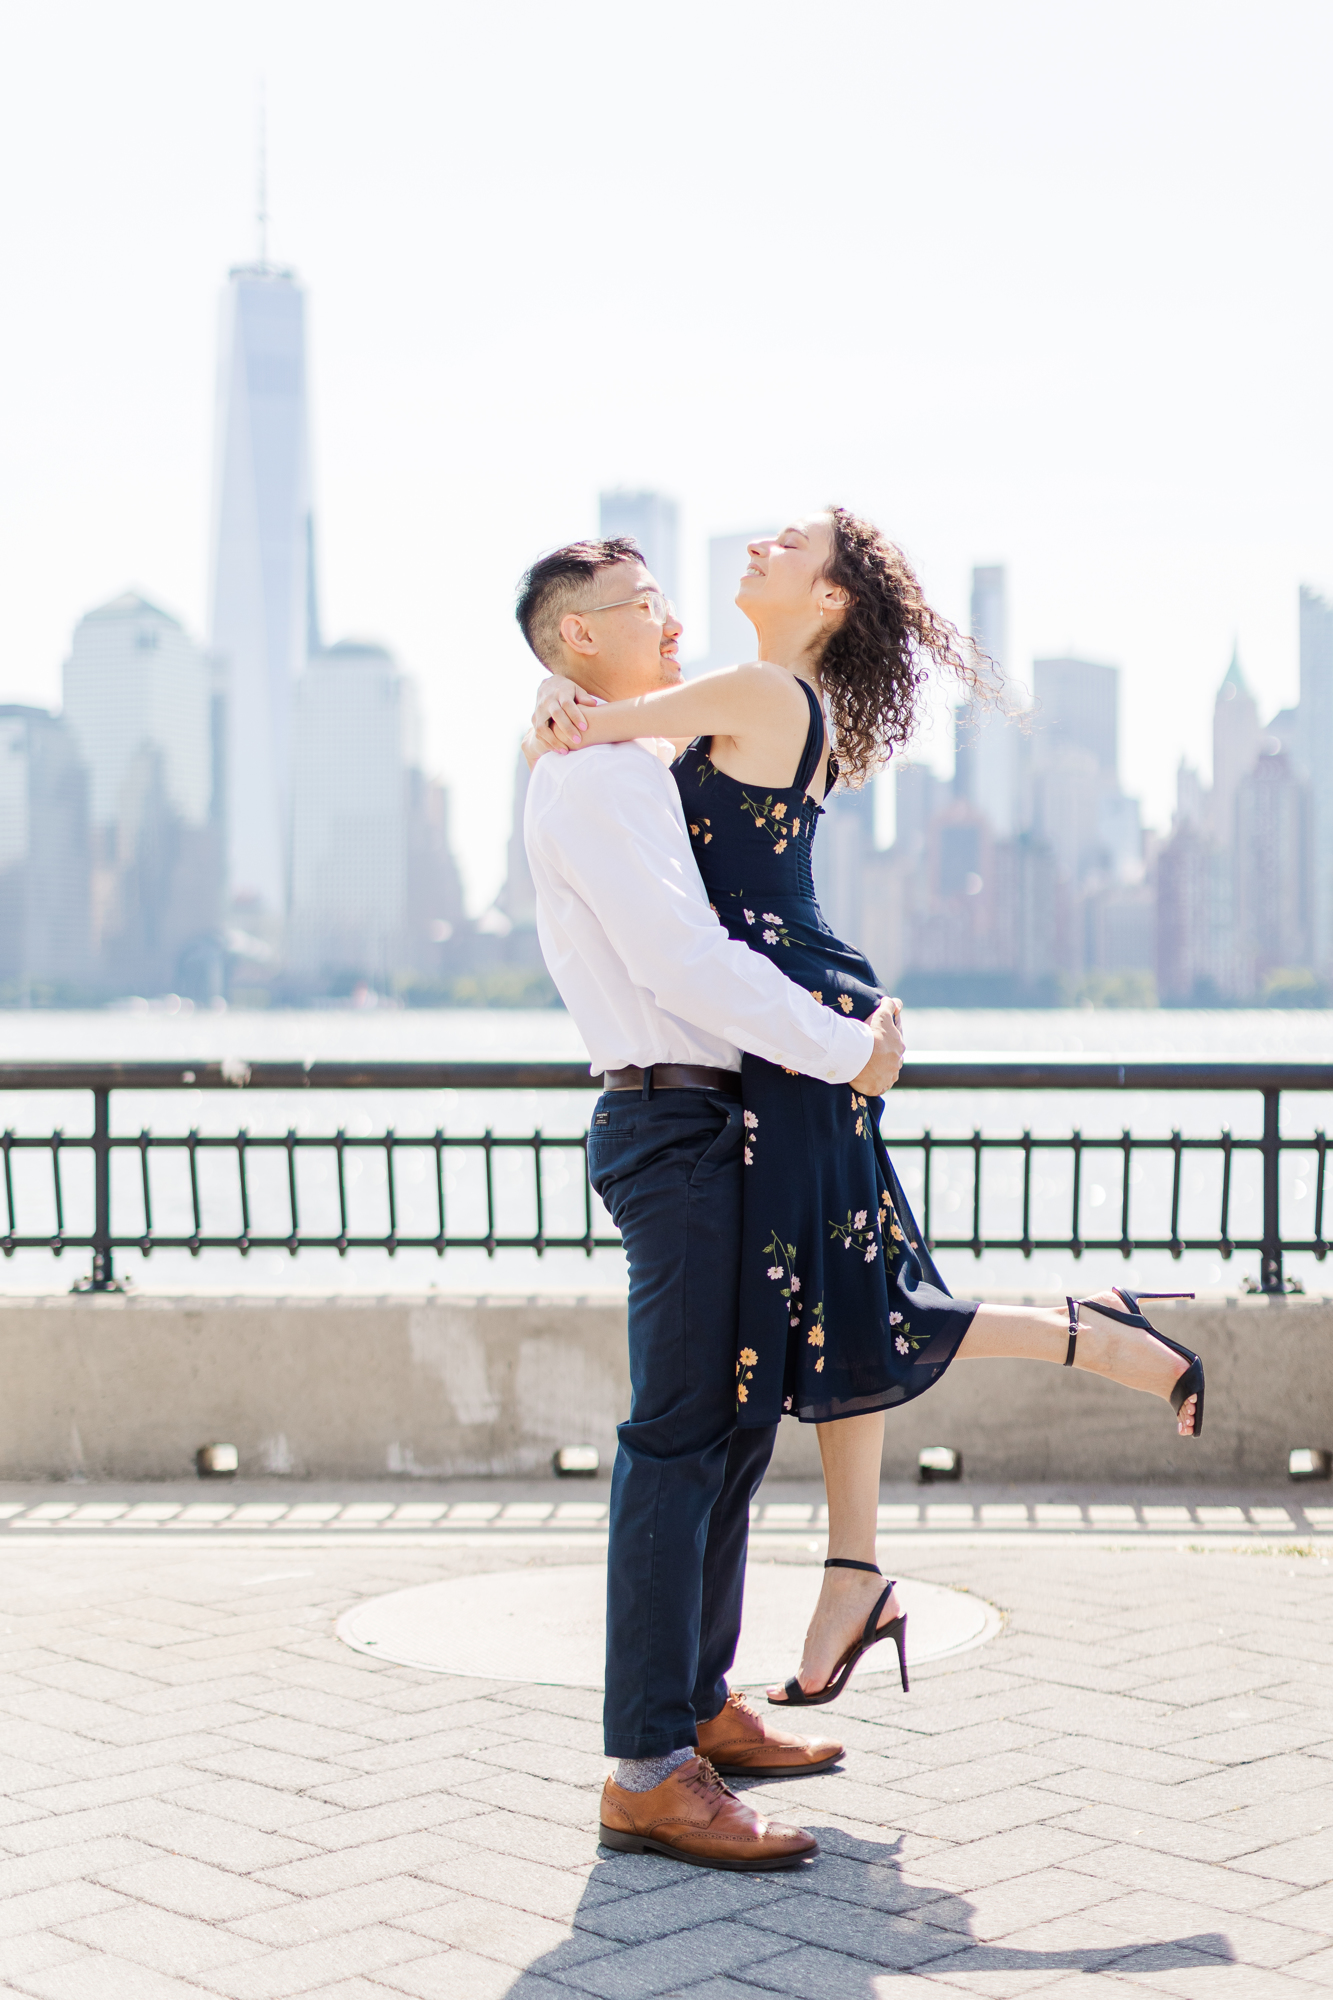 Candid Skyline Engagement Photos in Jersey City